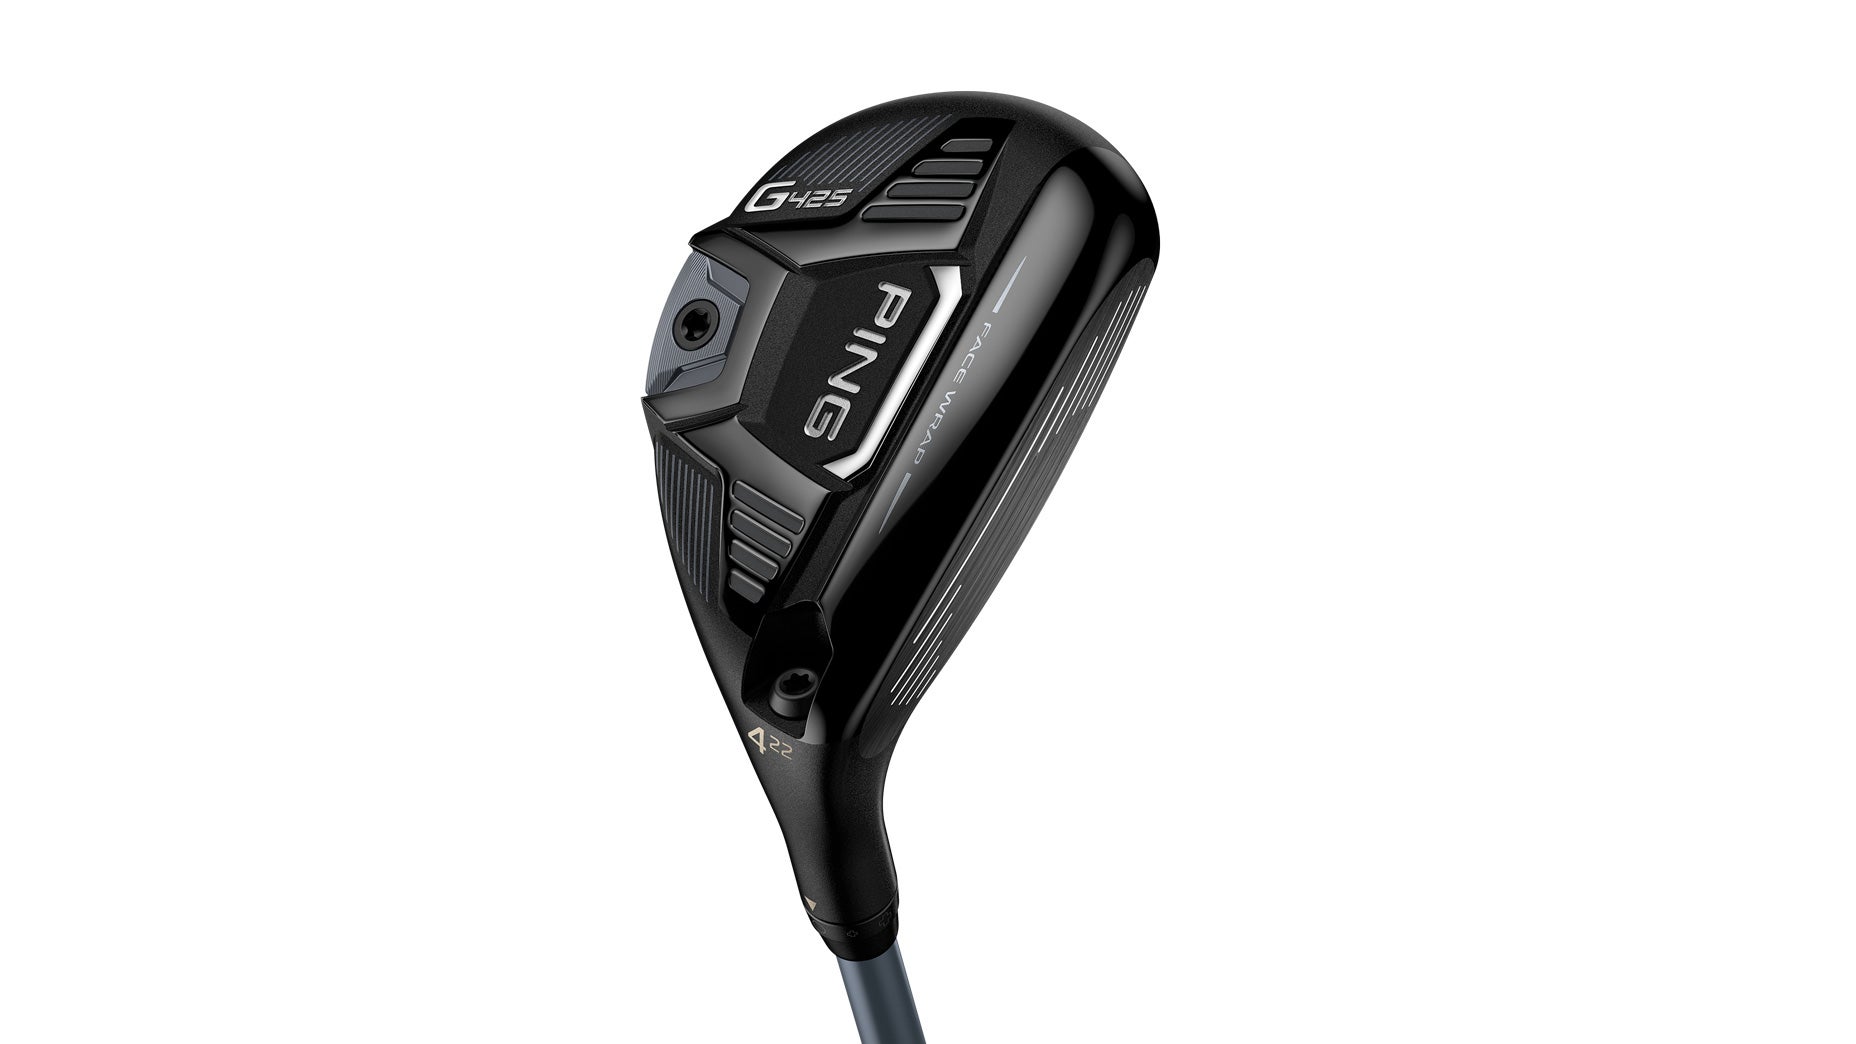 Ping G425 hybrid: ClubTest 2021 review